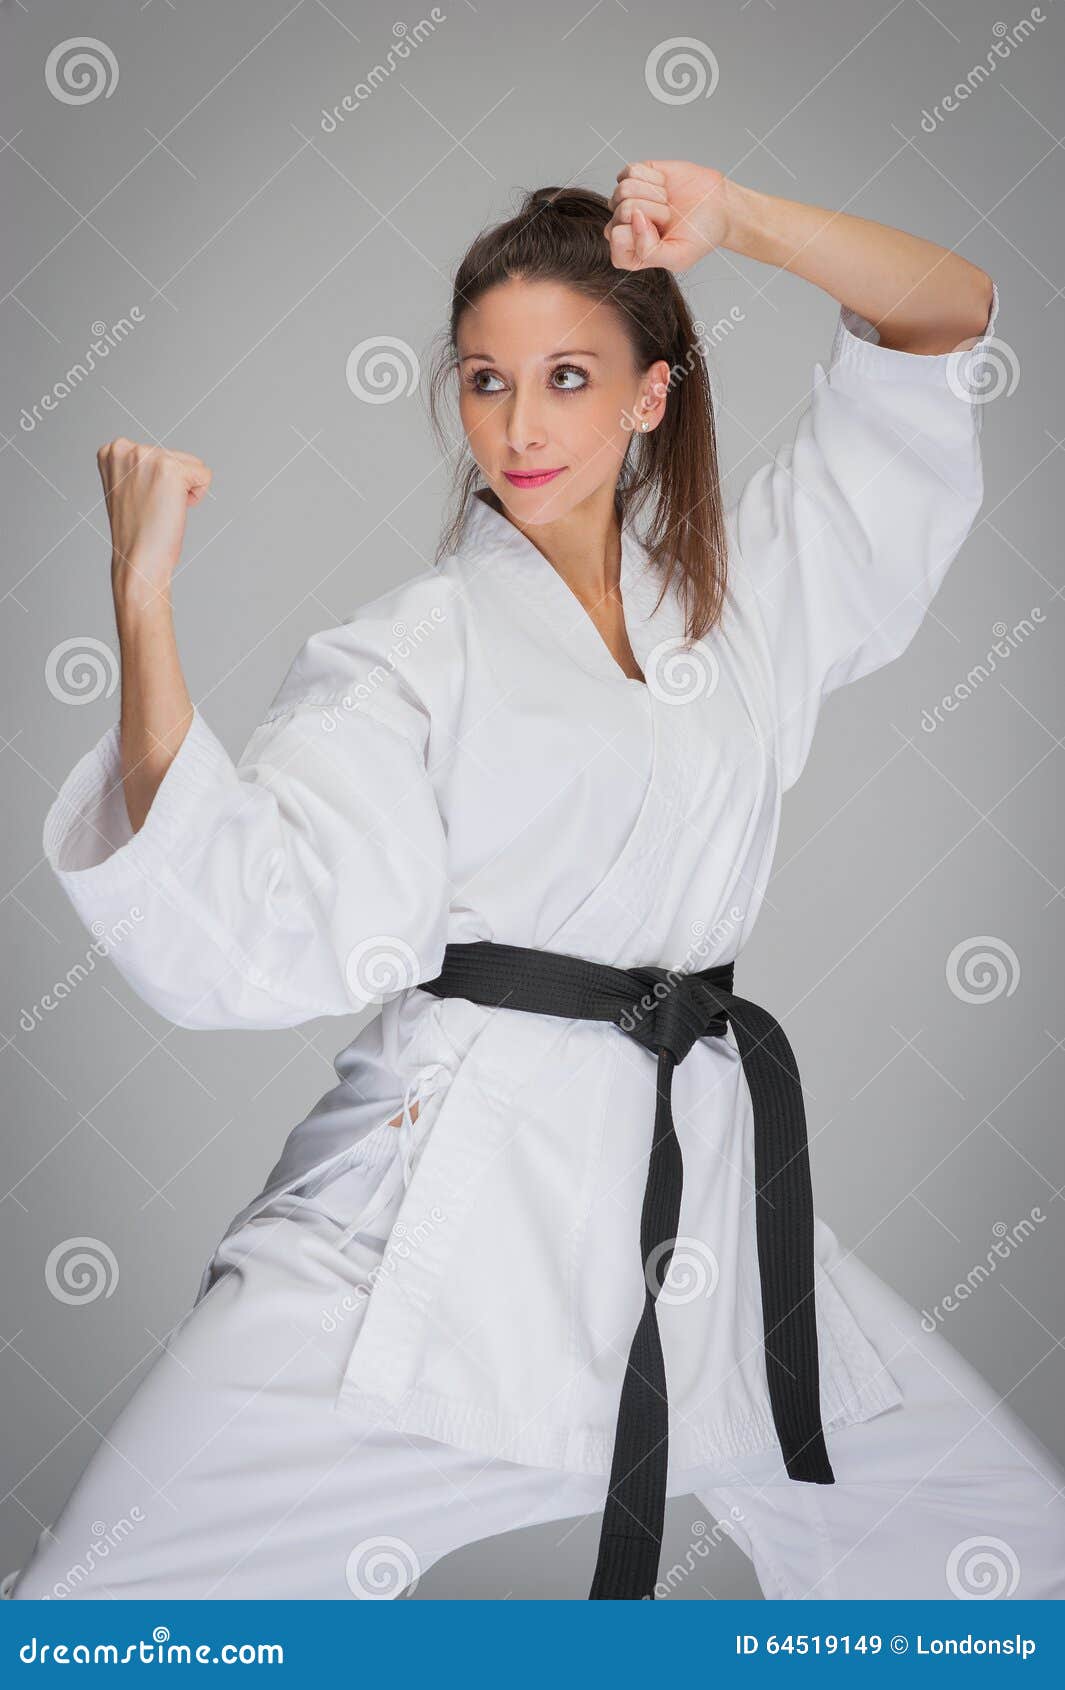 Martial Arts Woman in Combat Pose. Stock Image - Image of athletic ...